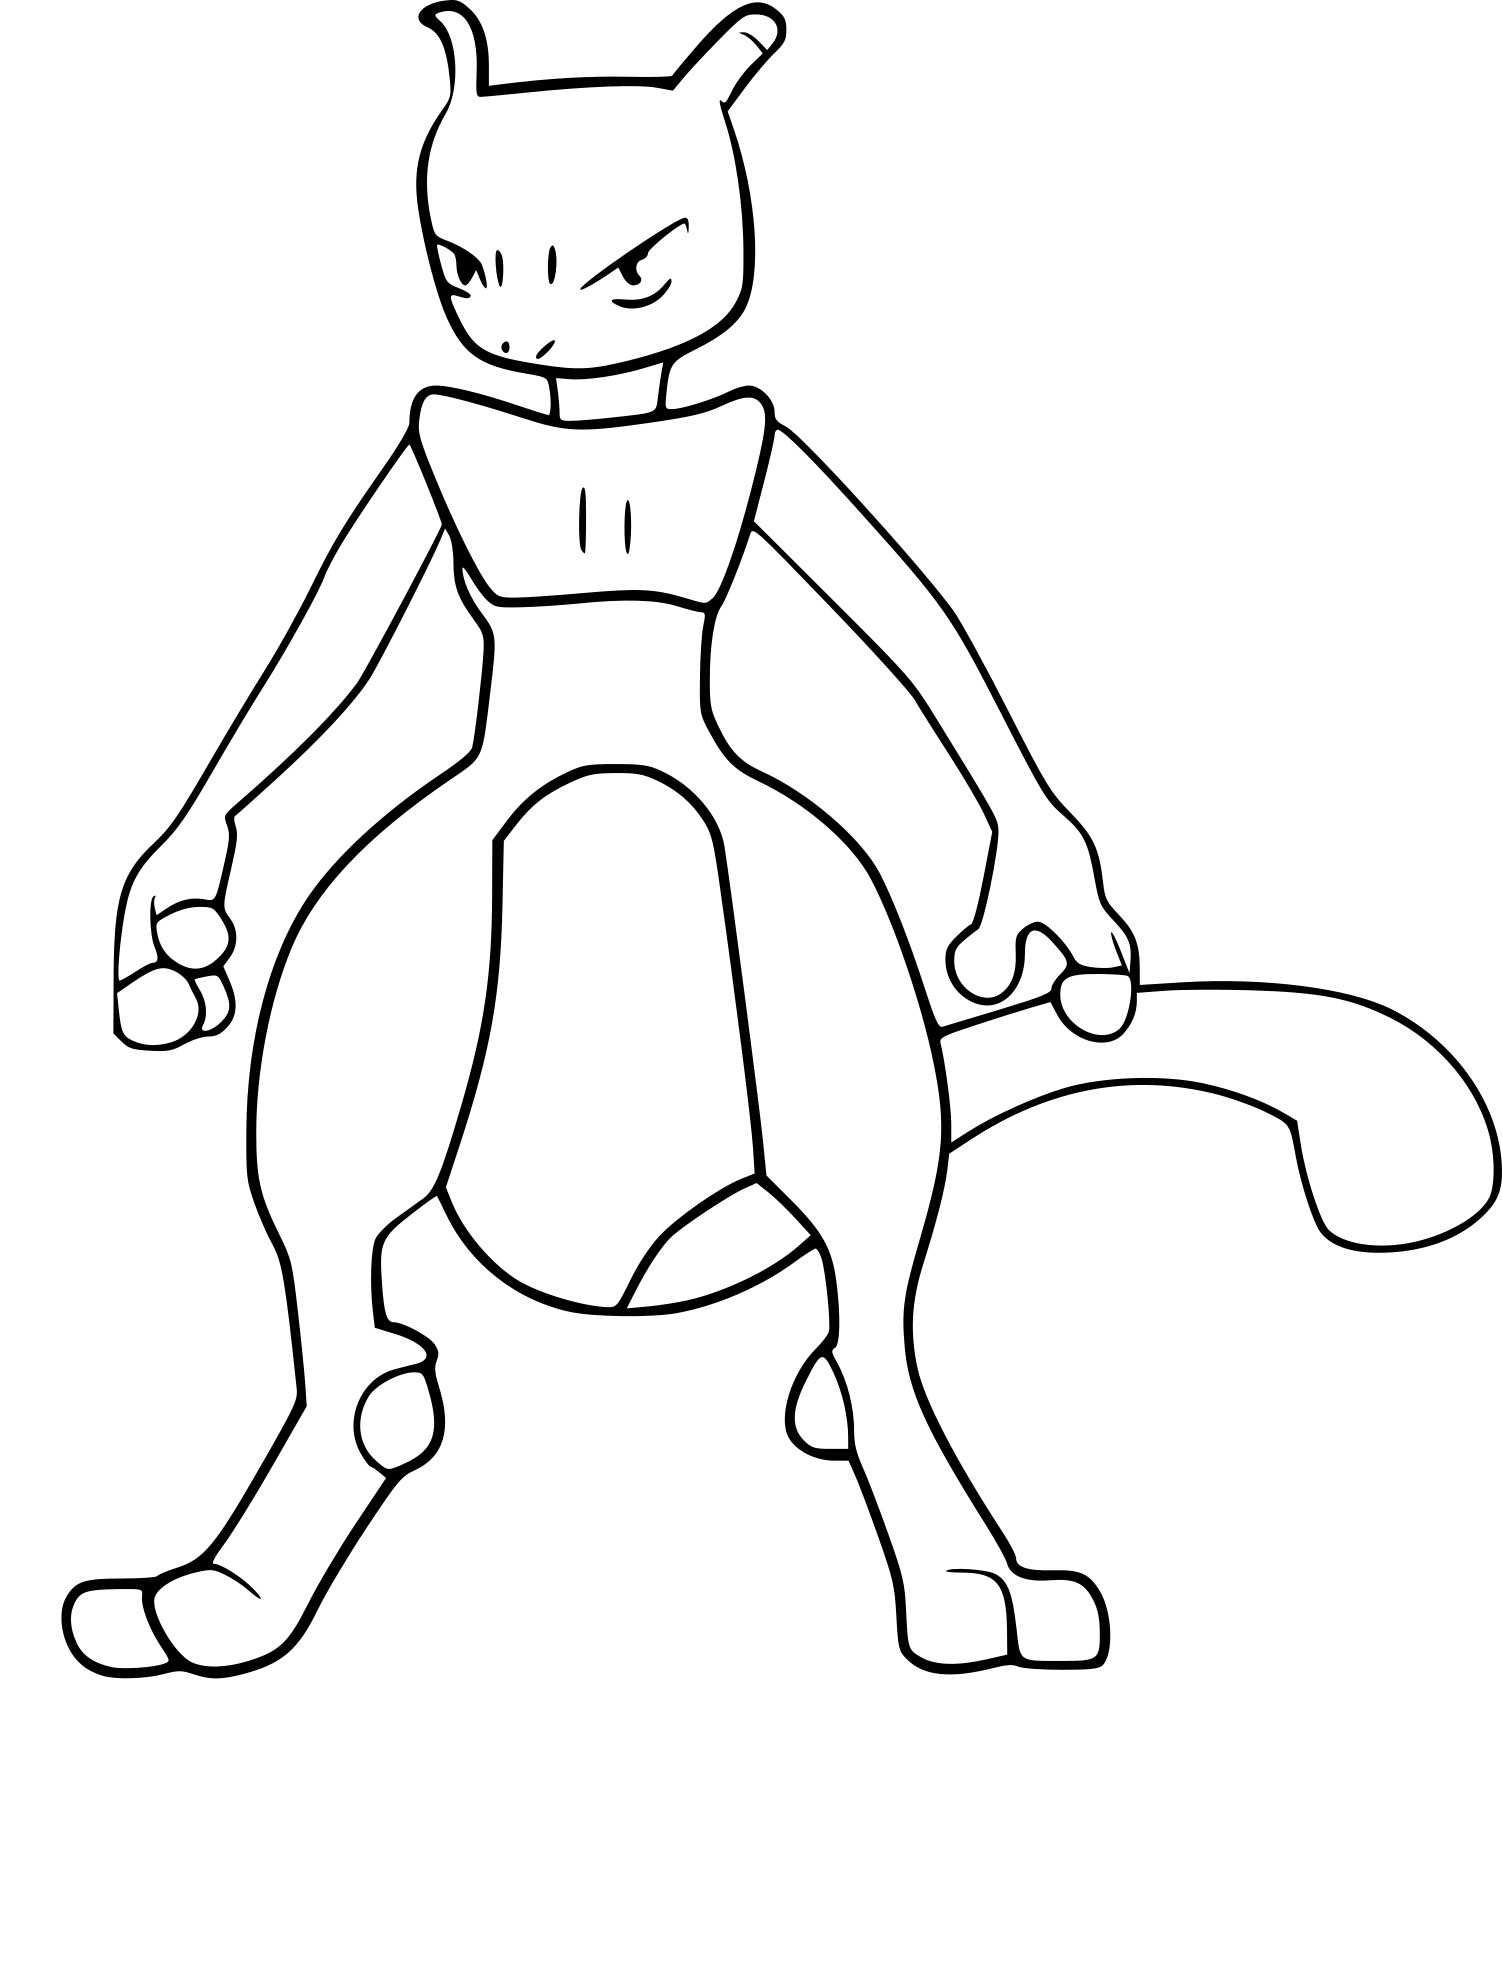 Mewtwo Pokemon Go coloring page